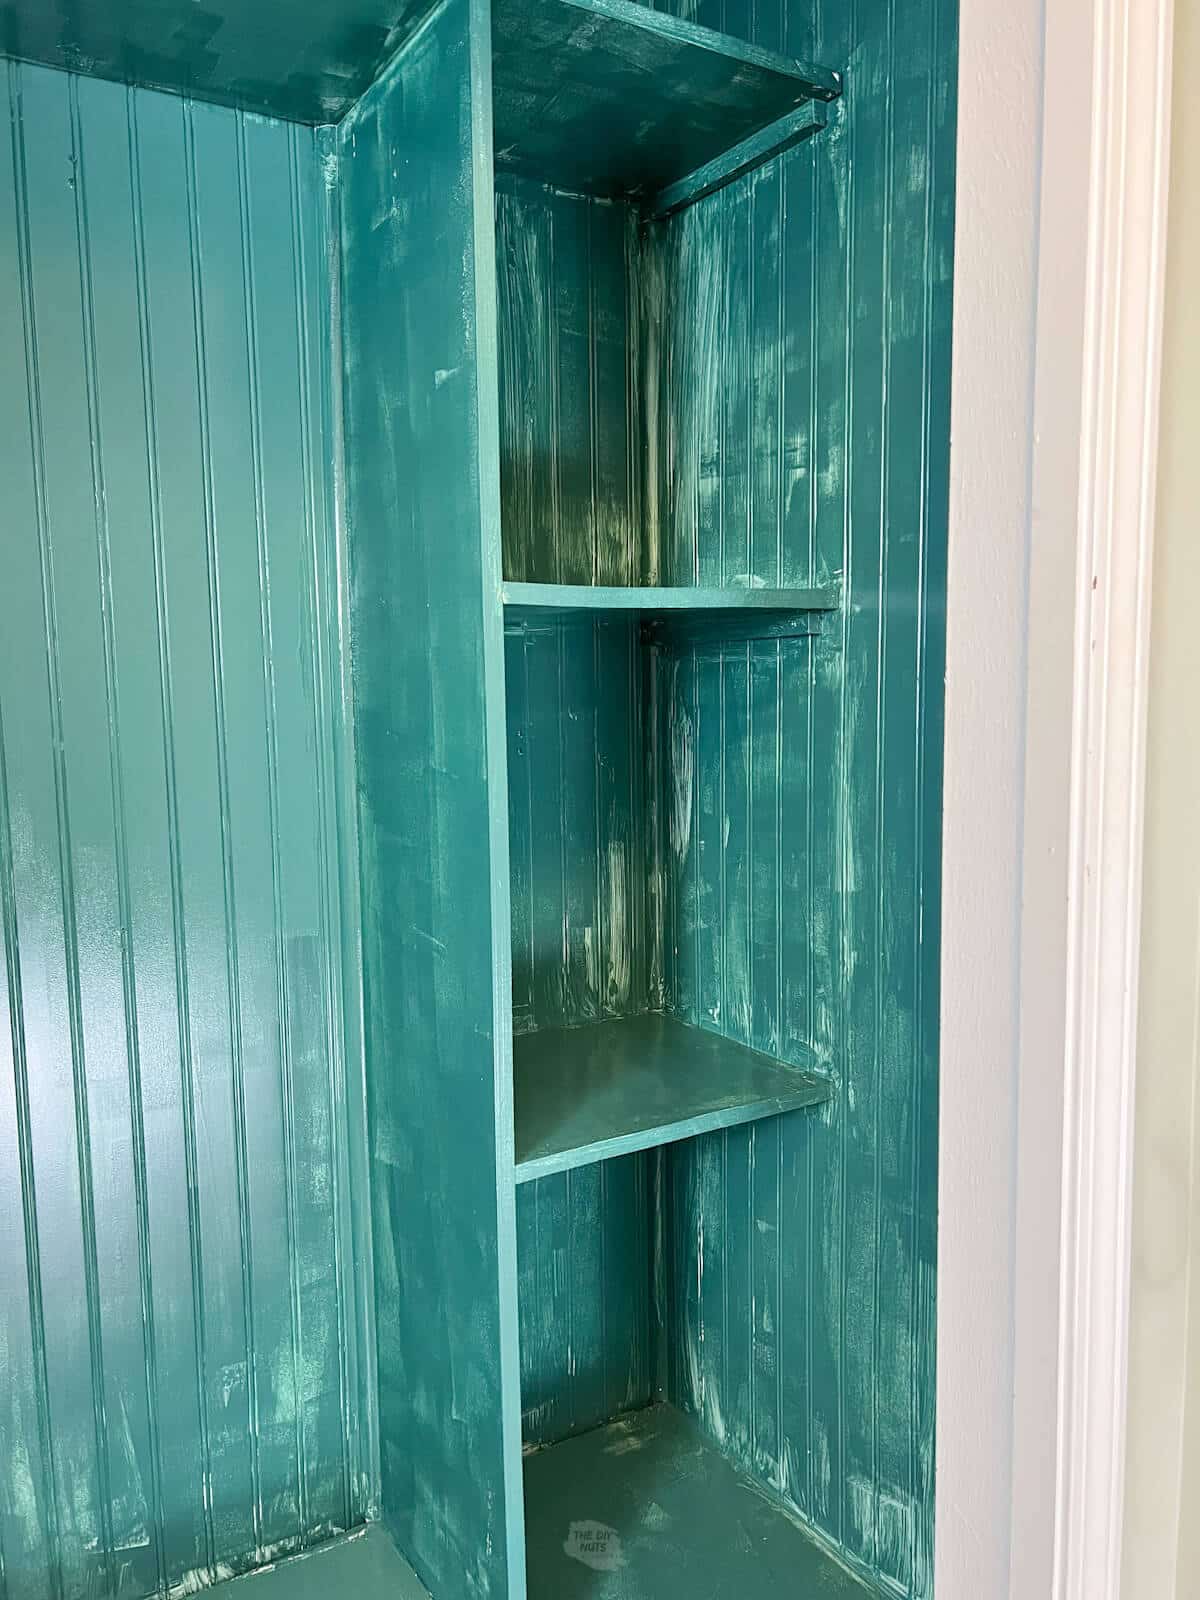 first coat of paint with blue green paint from Sherwin Willams on mudroom cubby.